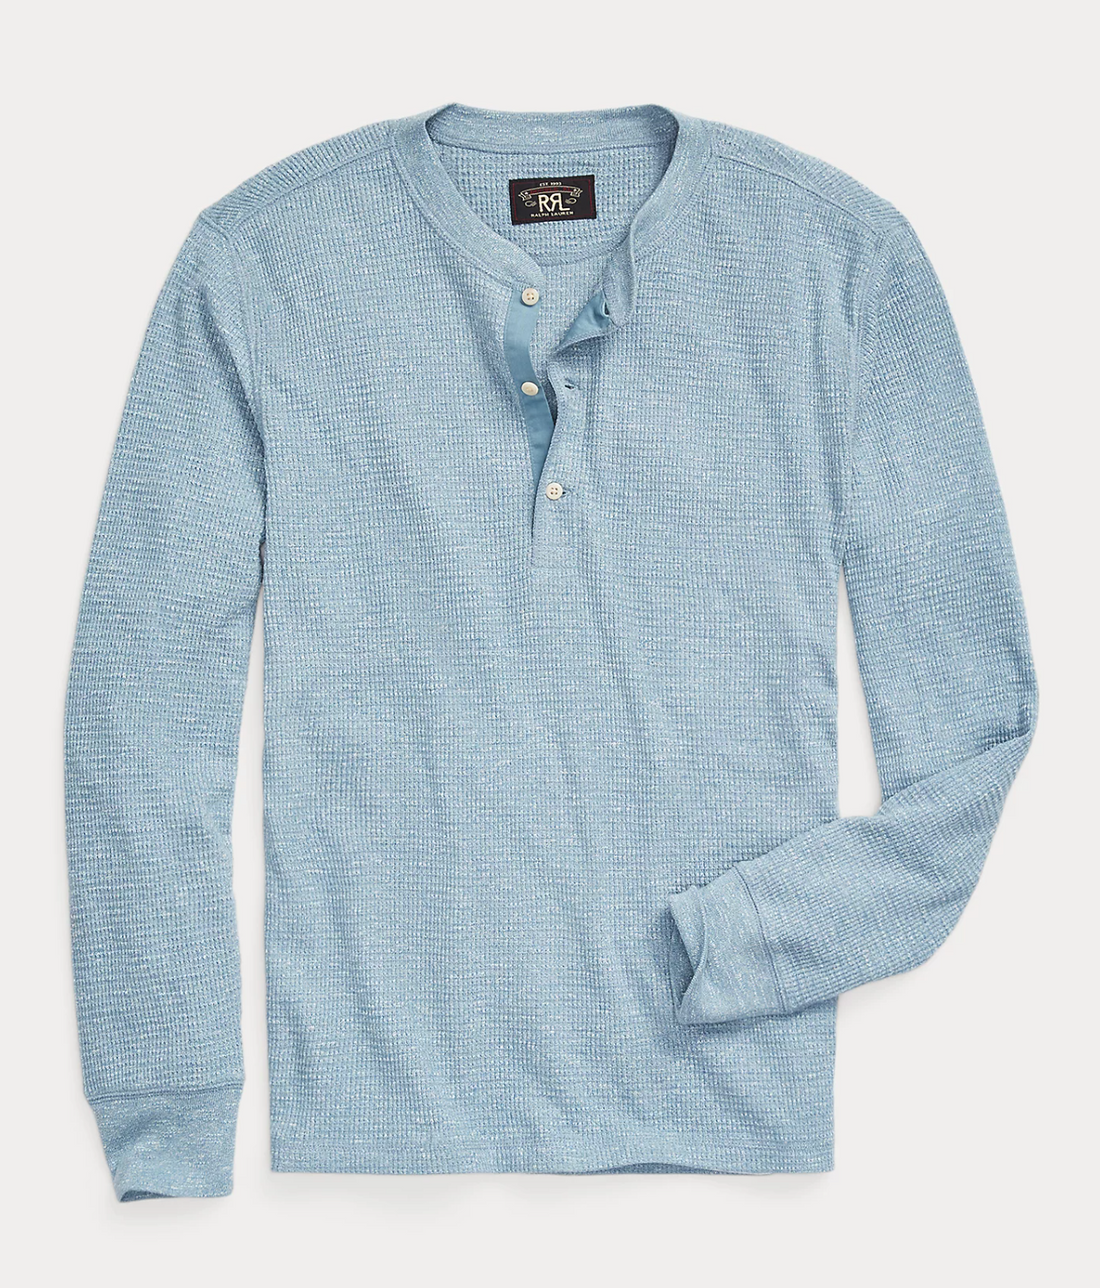 Double RL - Garment-Dyed Waffle-Knit Henley Shirt in Blue Heather –  Fountainhead NY